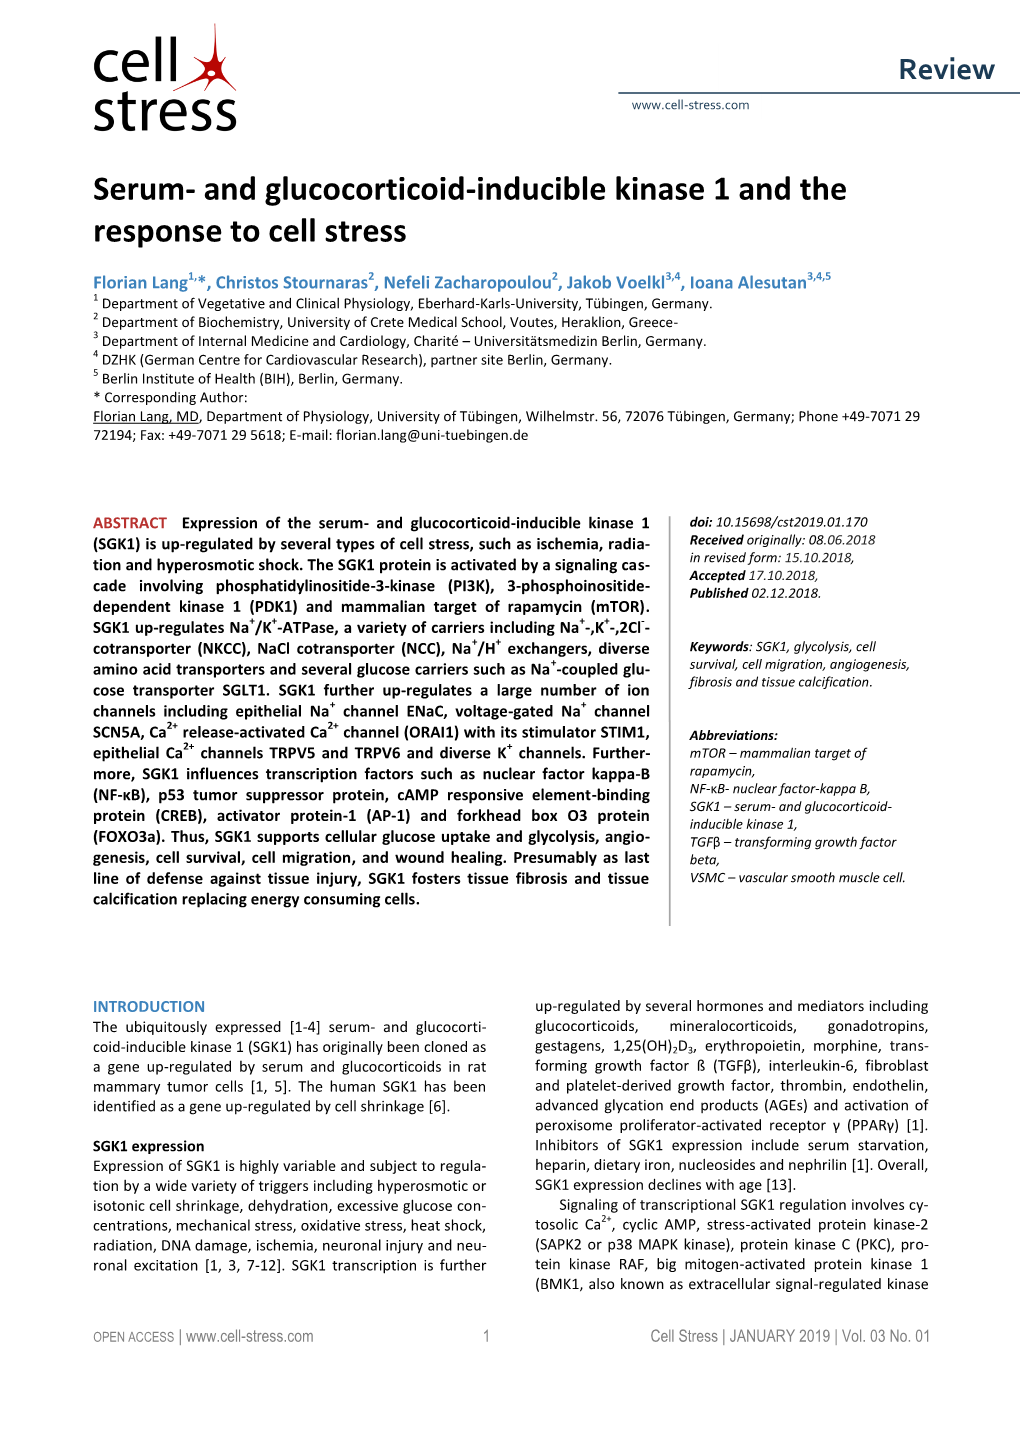 Serum- and Glucocorticoid-Inducible Kinase 1 and the Response to Cell Stress